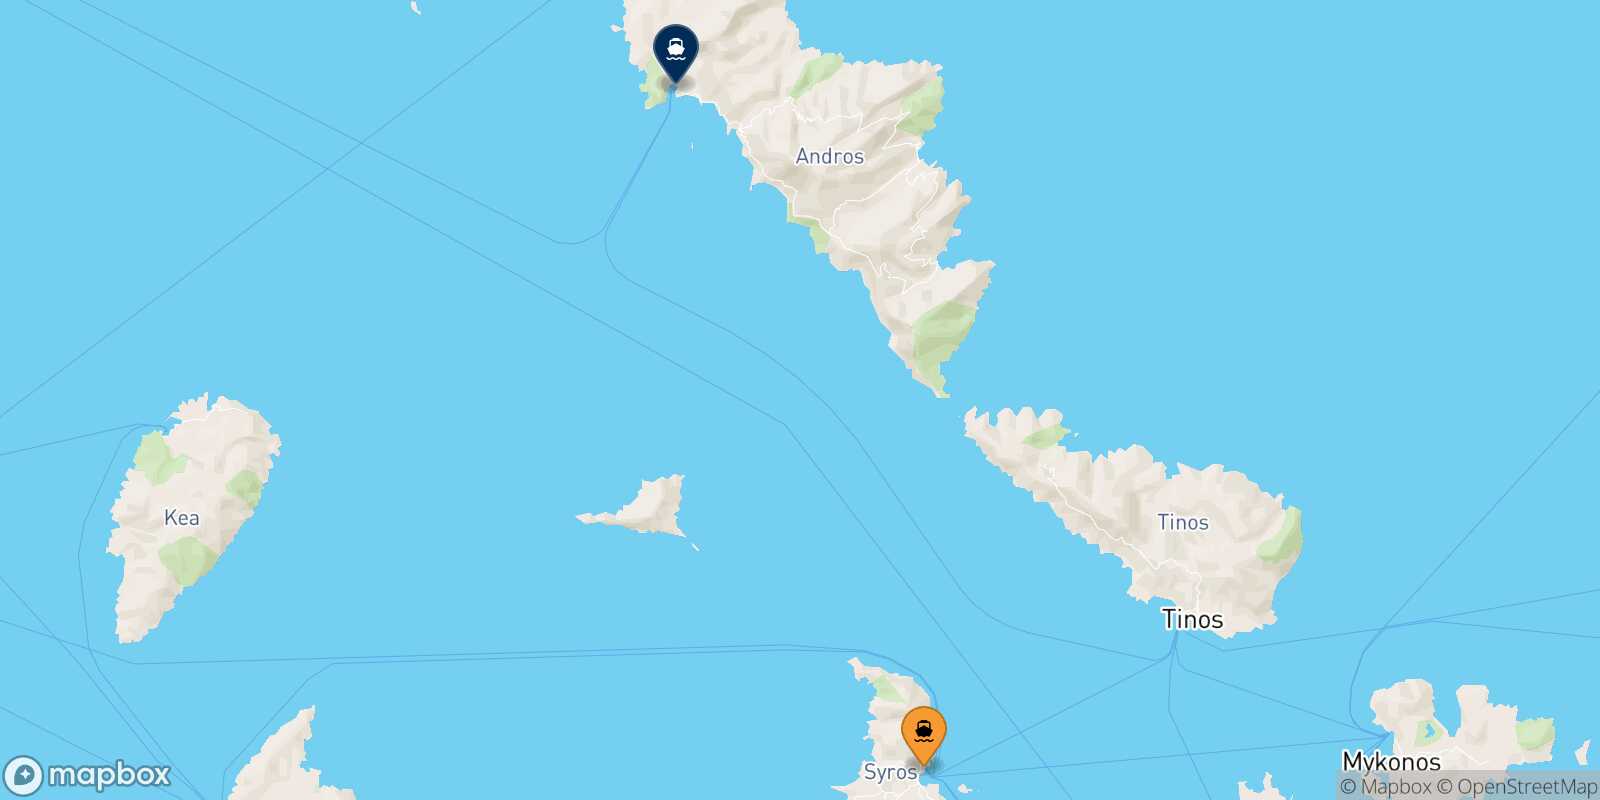 Syros Andros route map